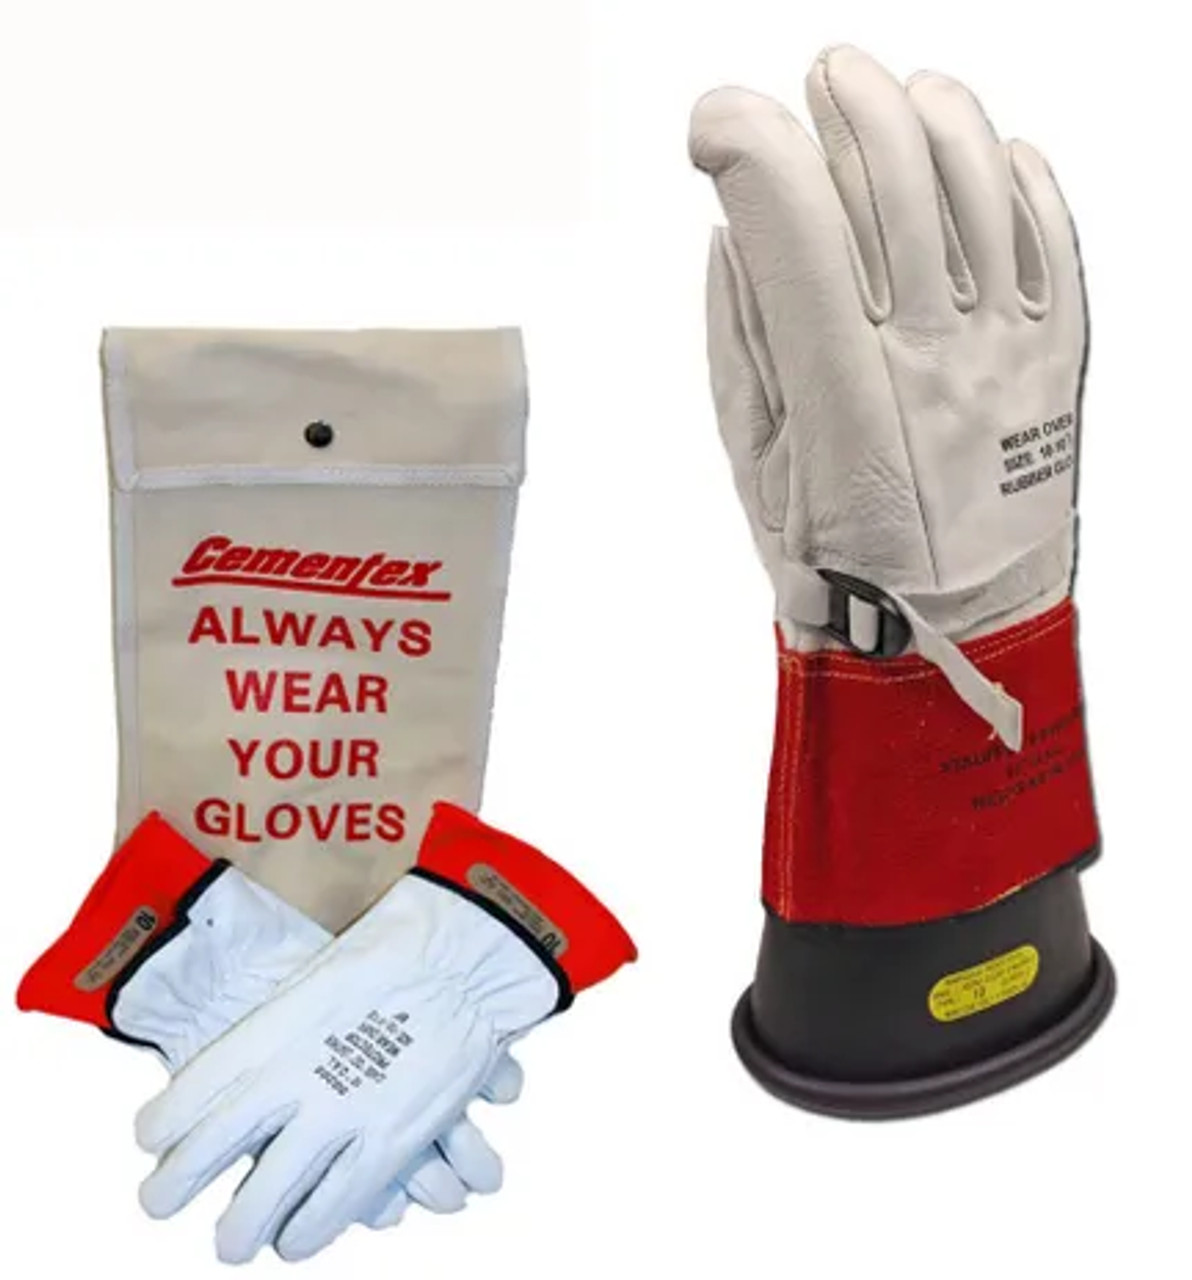 Class 0 Insulated Low Voltage Glove Kit - Red 14 inch 1000V Gloves